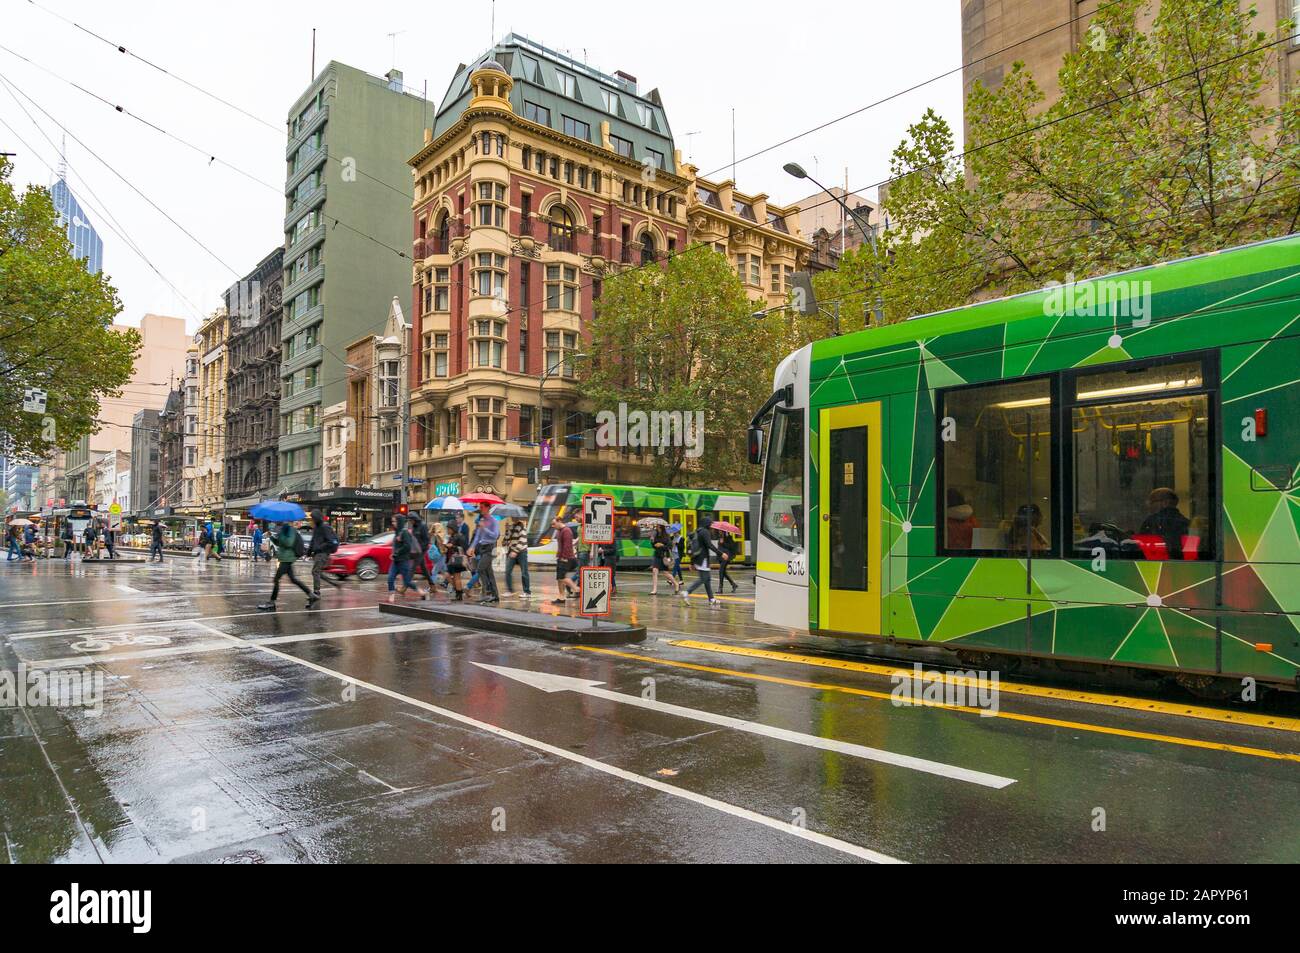 Melbourne, Australia - April 21, 2017: Melbourne urban infrastructure. People crossing intersection and tram stopping on red lights on rainy weather Stock Photo